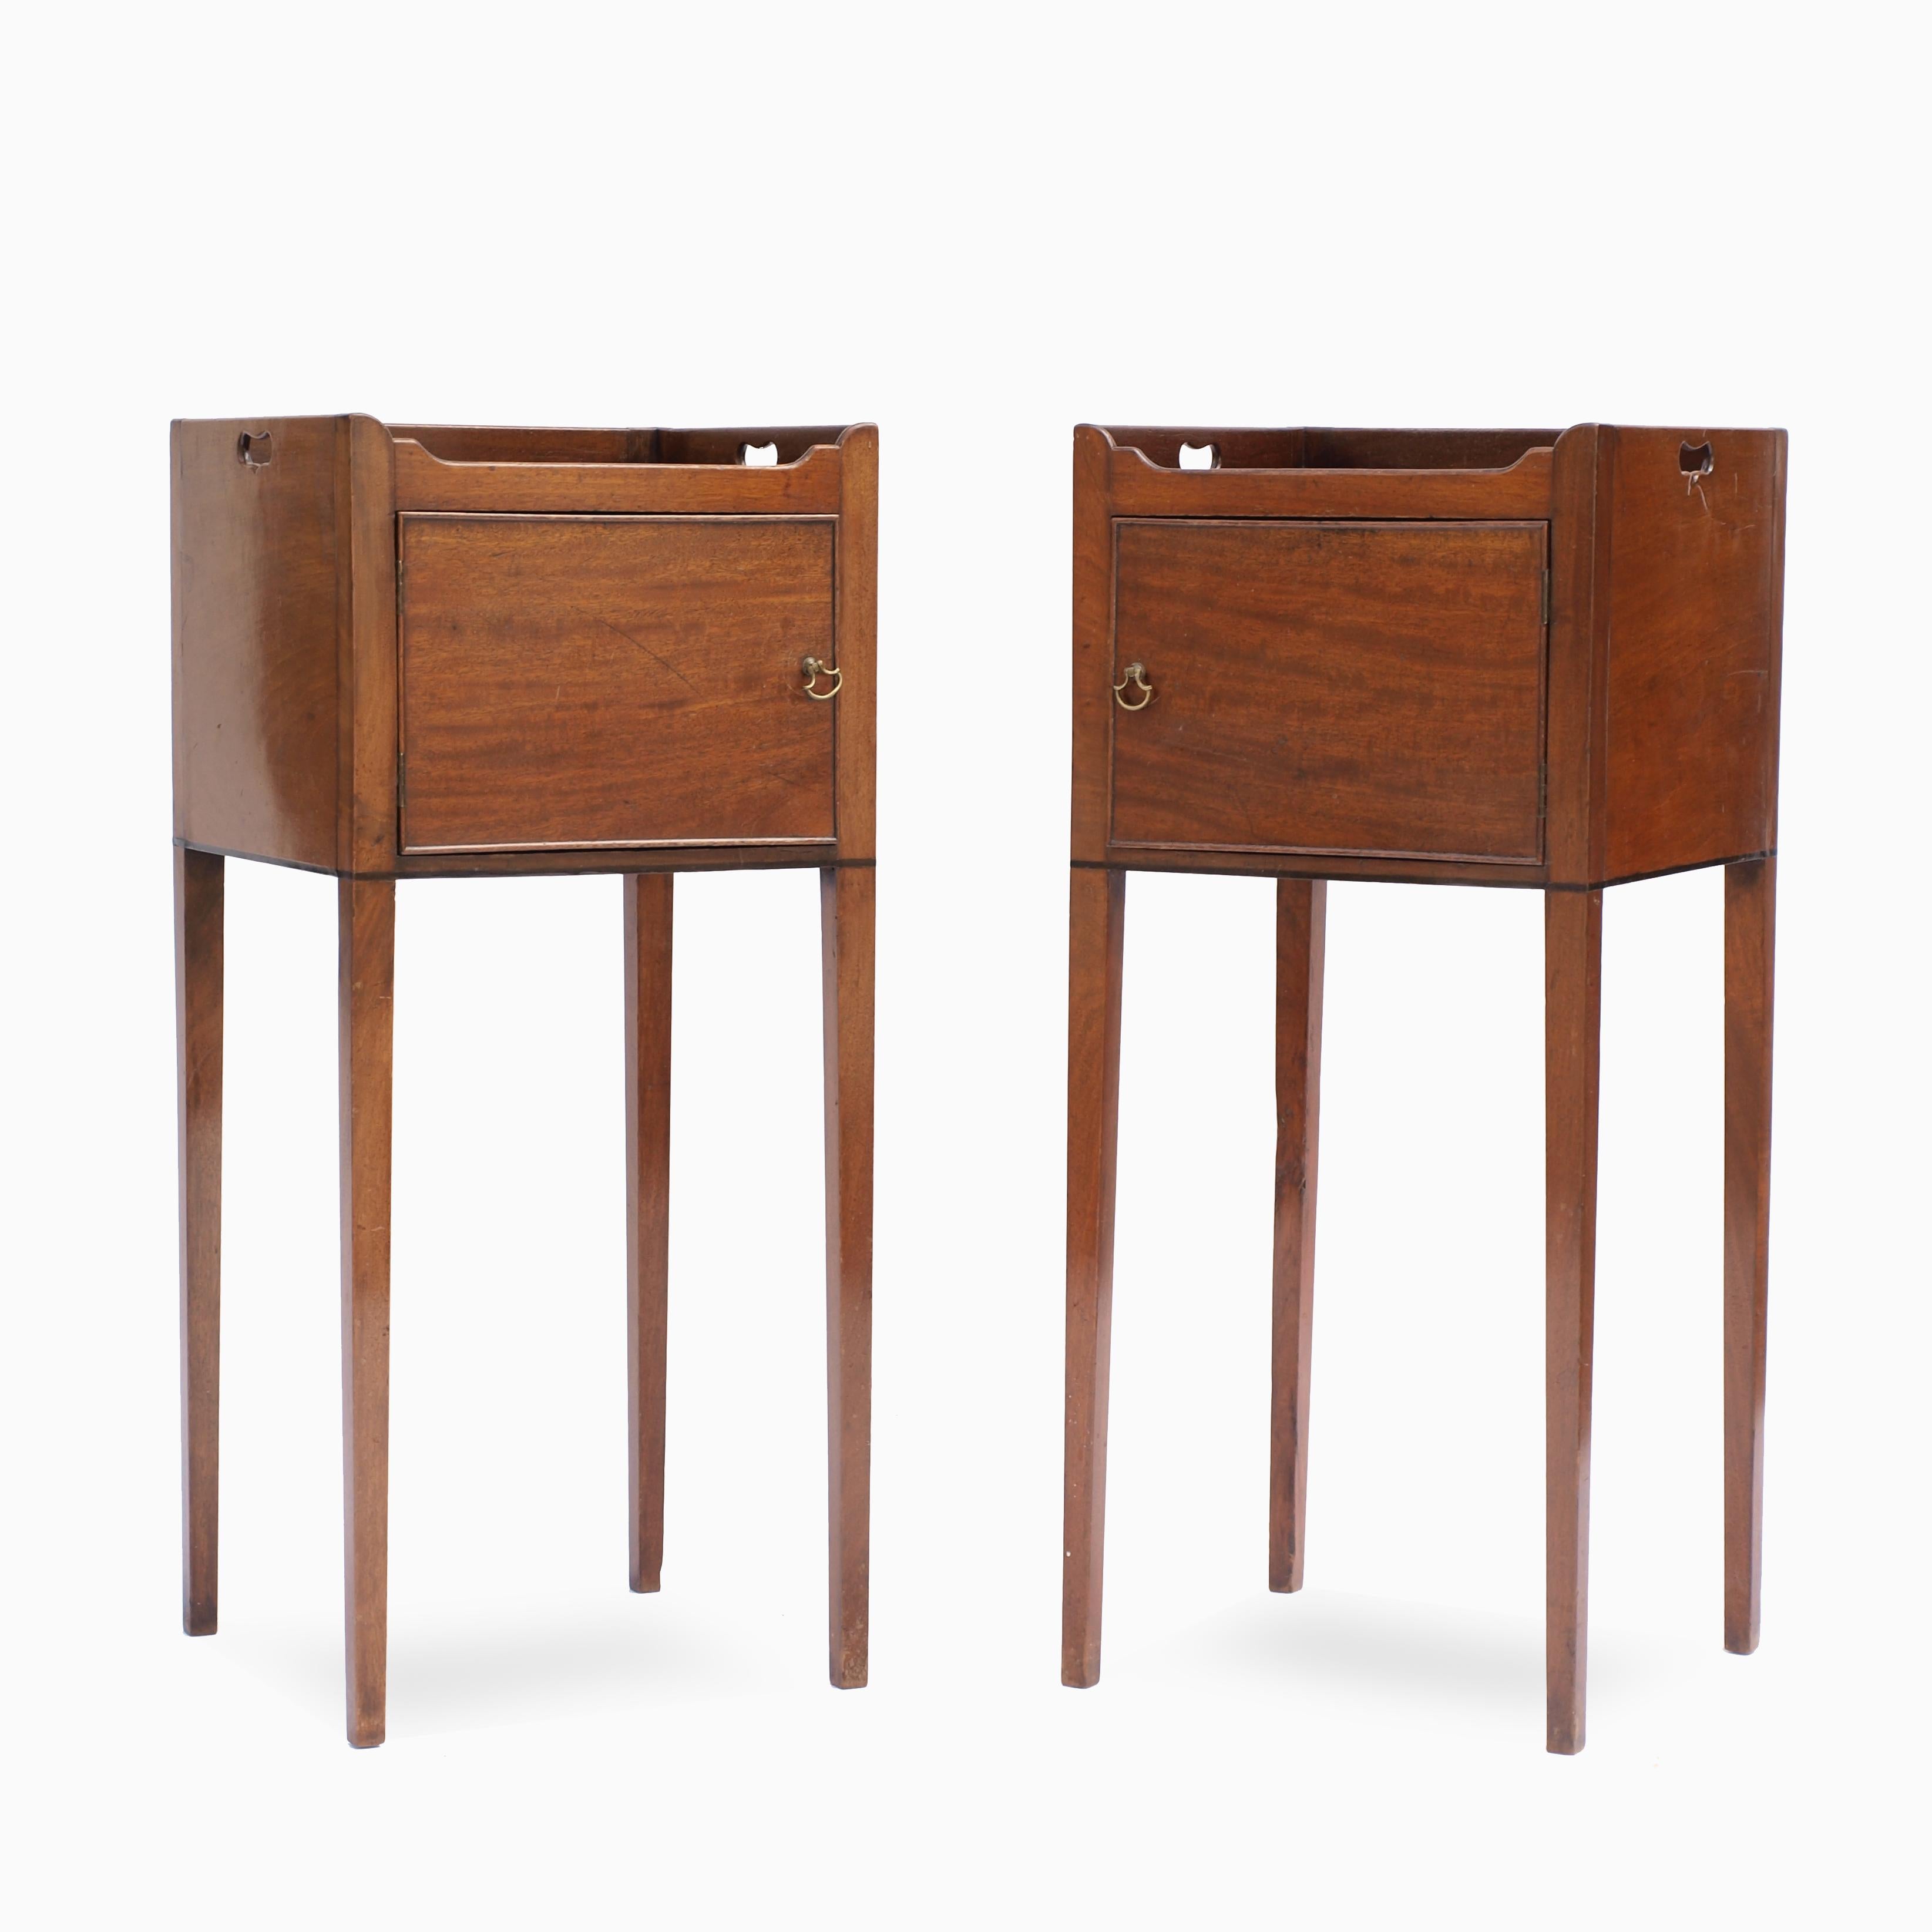 A fine pair of Chippendale period mahogany bedside cabinets, circa 1785, the galleried tops have pierced carrying handles and at the base a single line of ebony inlay, resting on beautifully tapered square legs. The doors of figured mahogany are